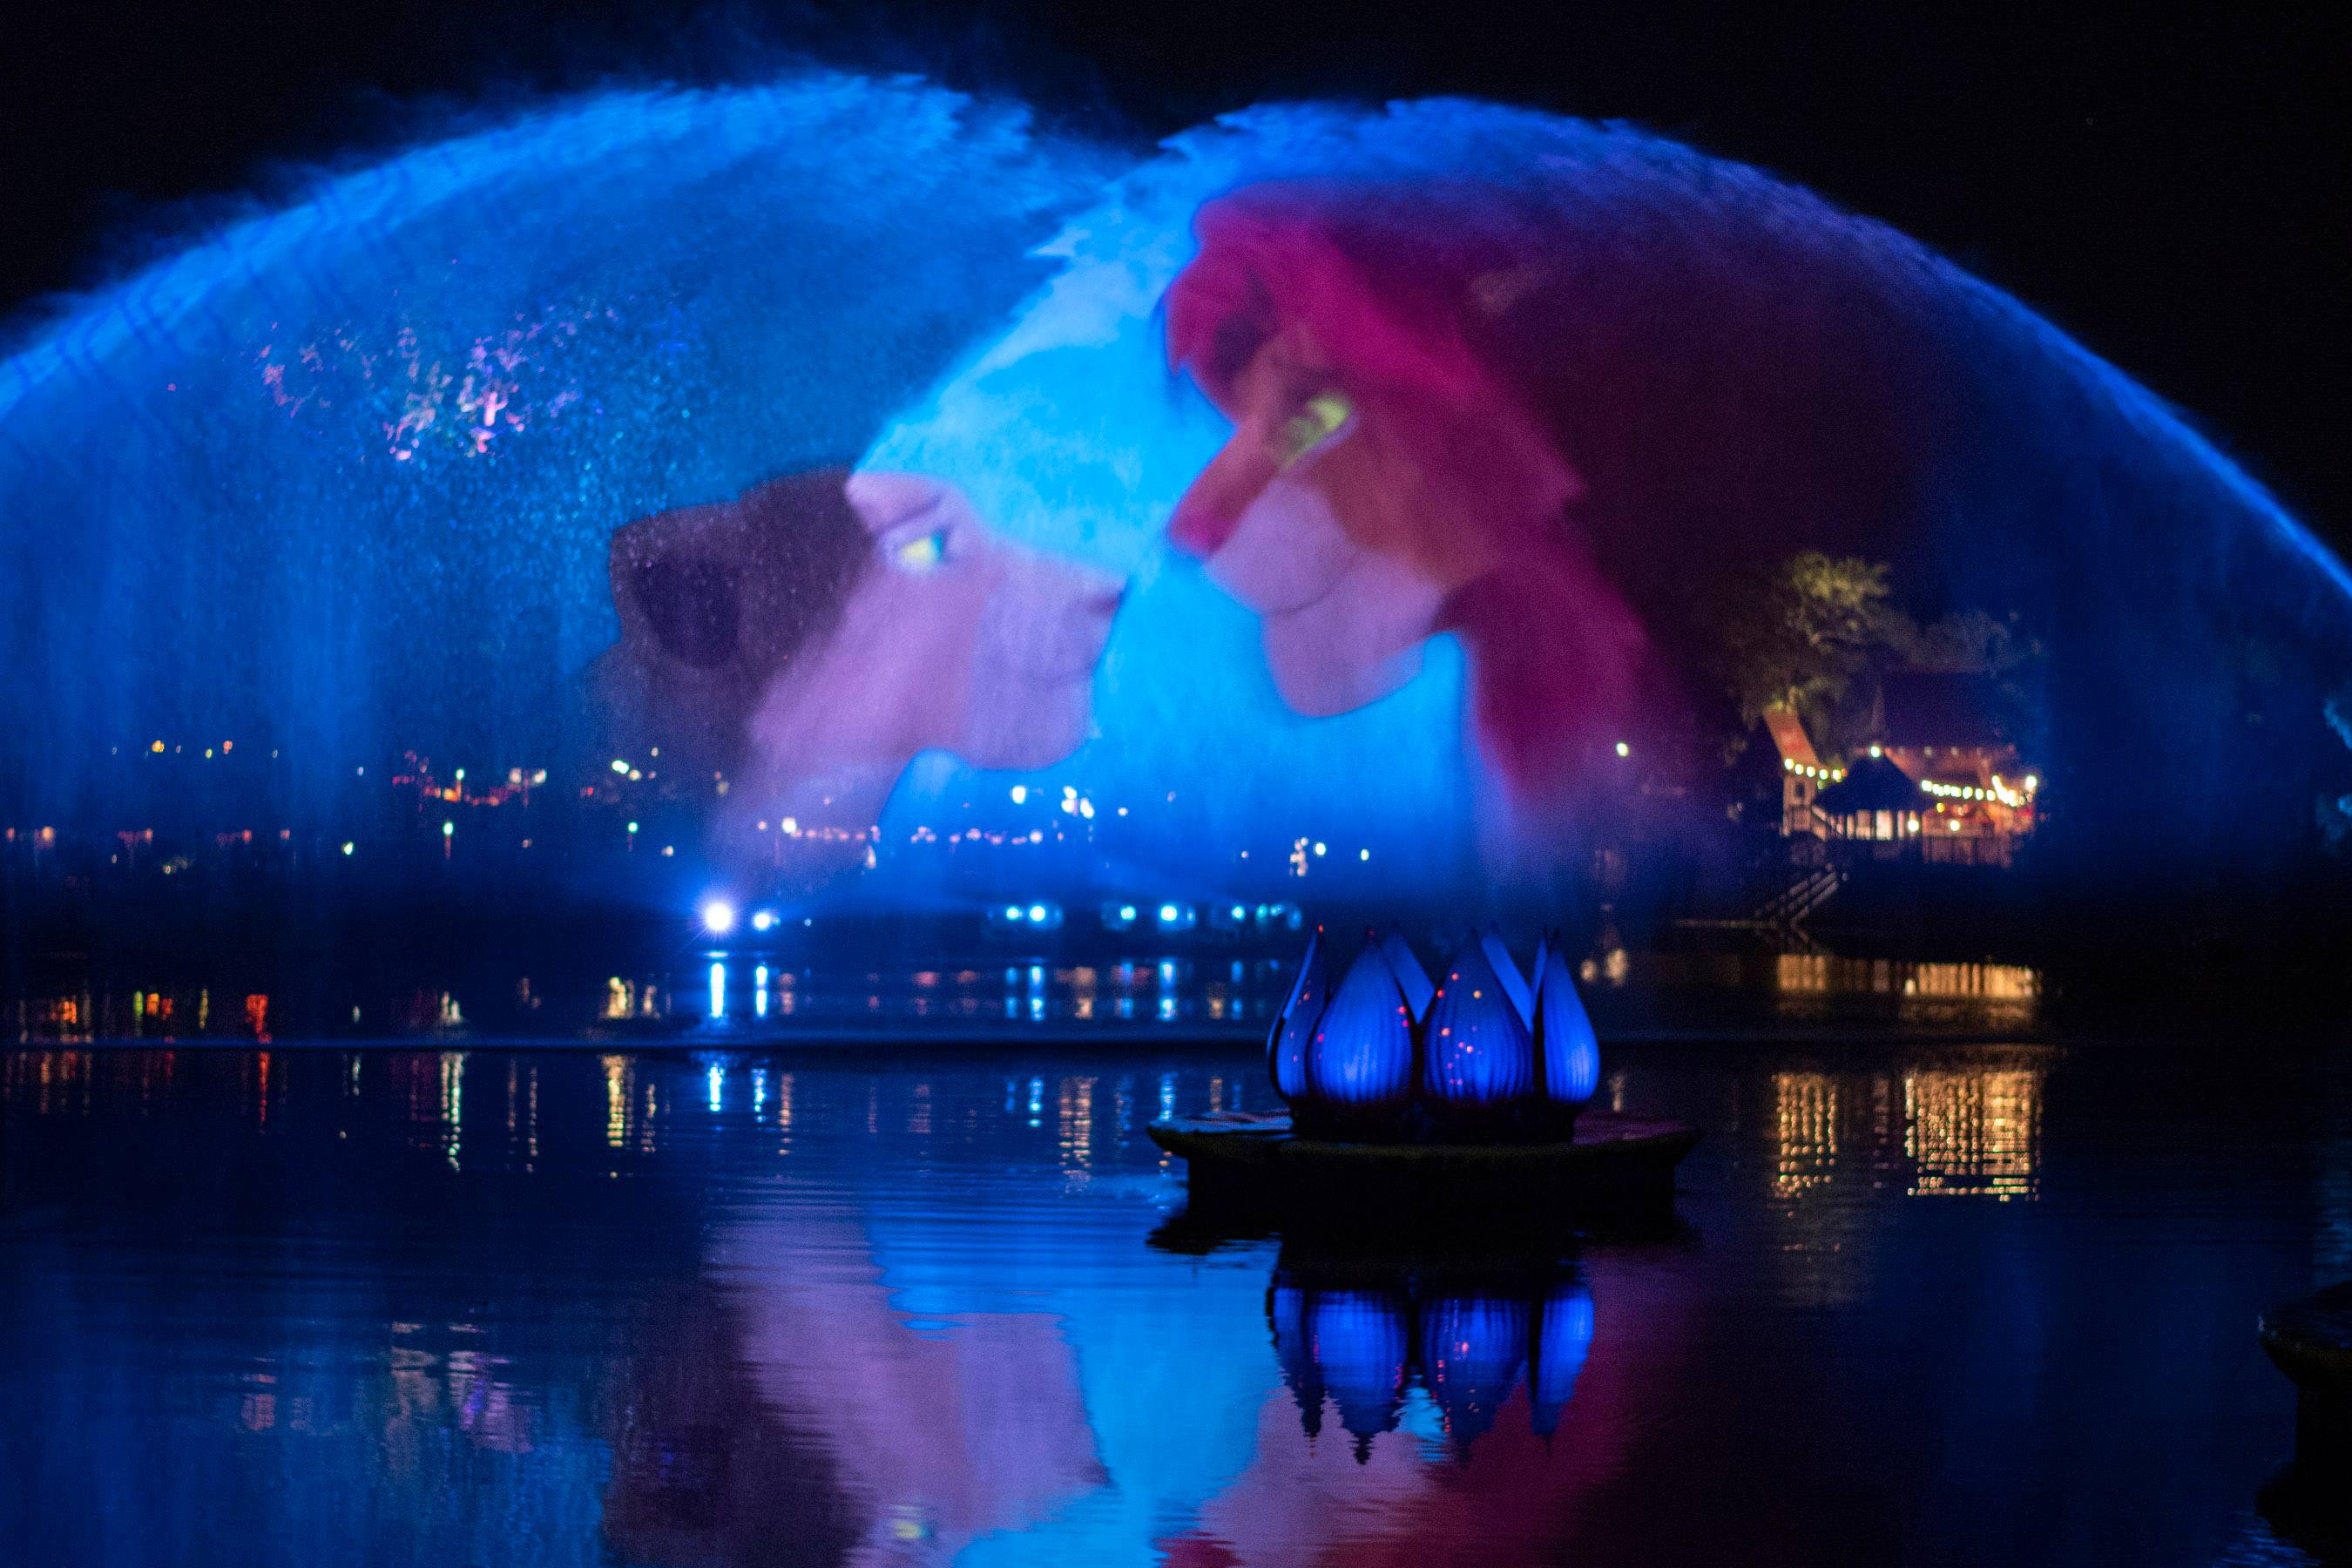 Disney added scenes from movies to Rivers of Light to try to boost ratings